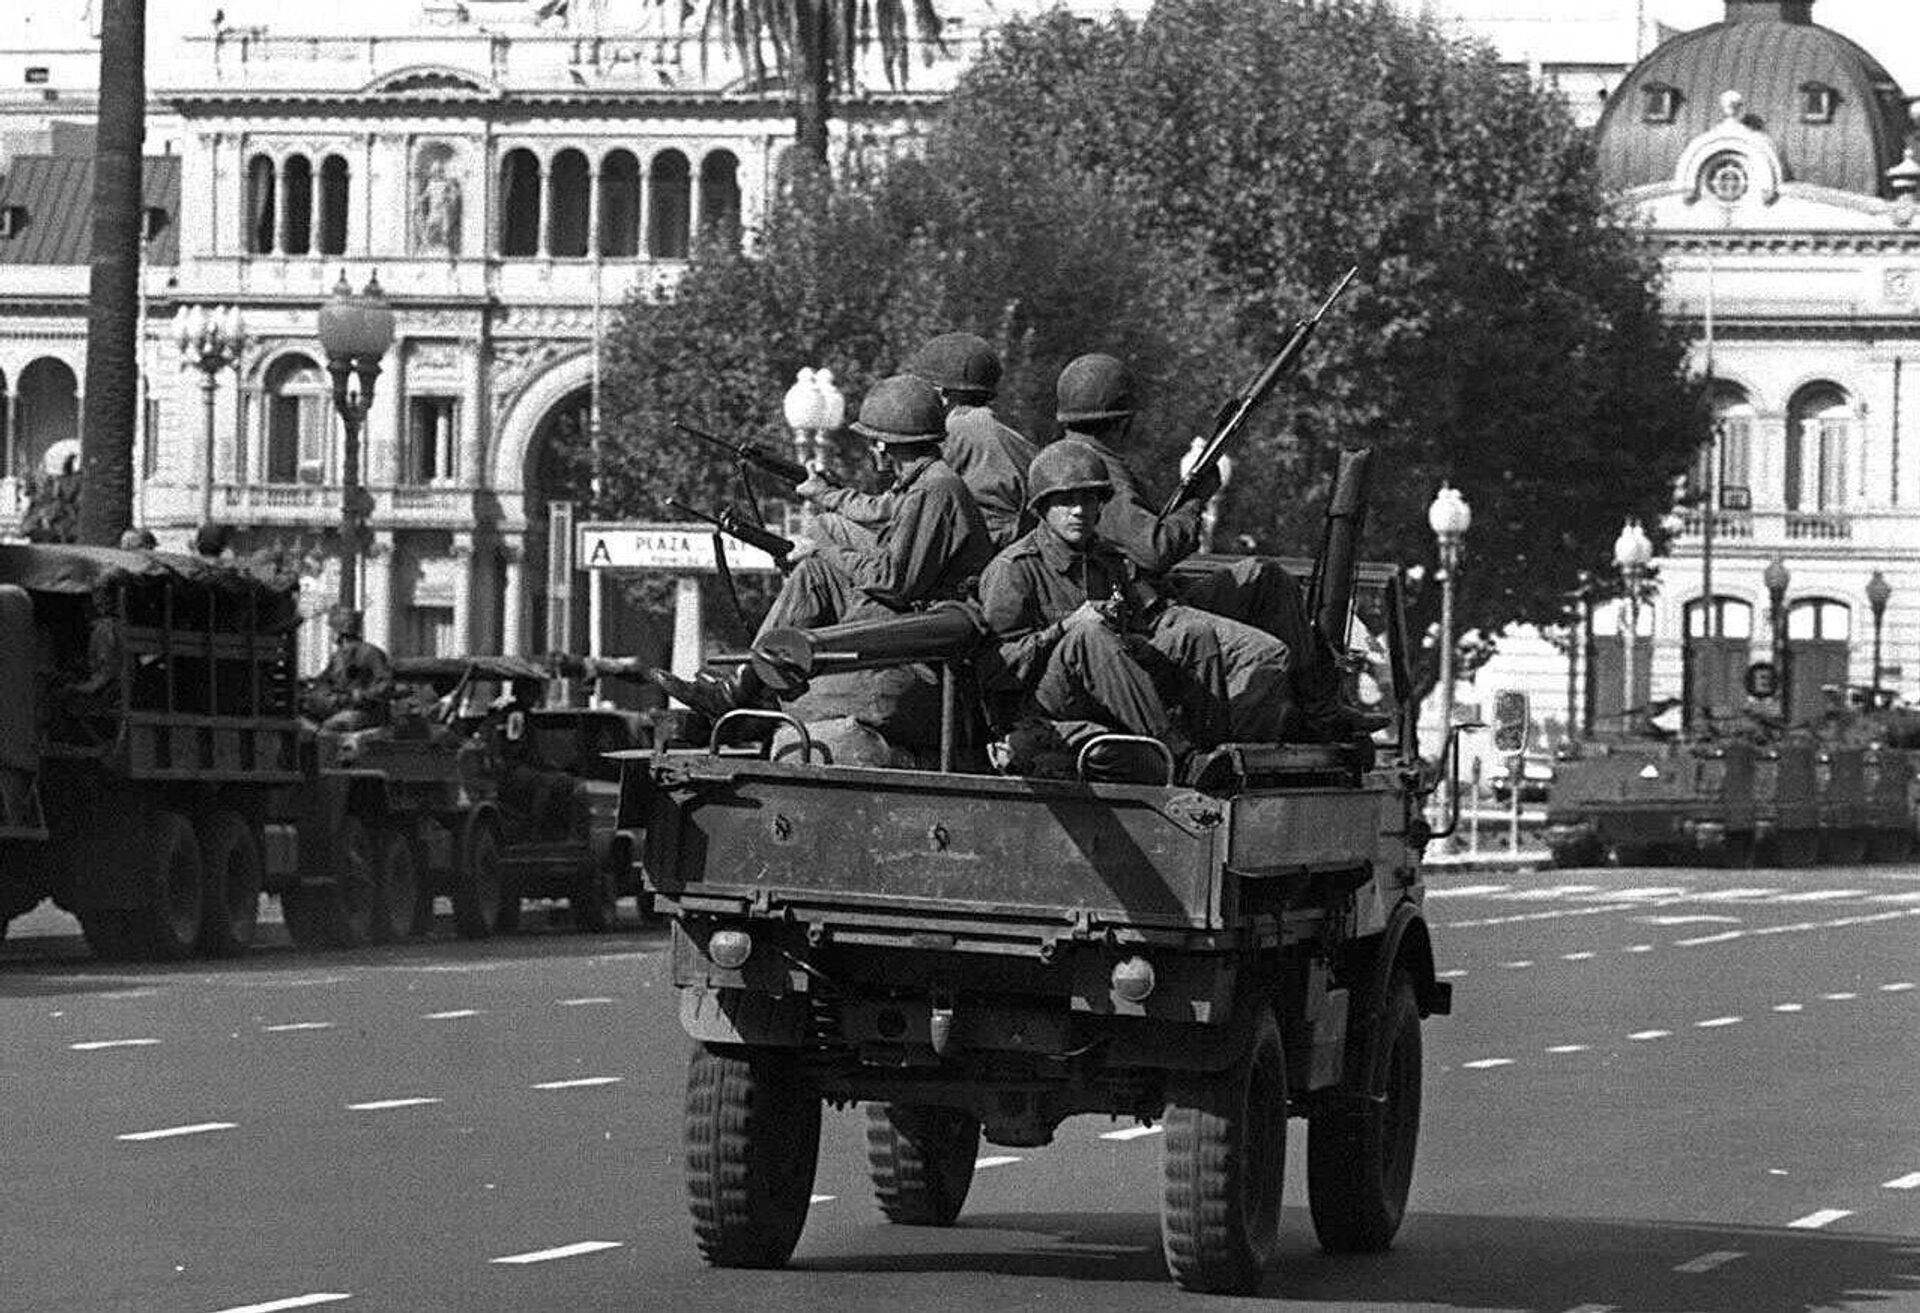 Army soldiers patrol the Buenos Aires Plaza de Mayo on March 24, 1976 after a military coup led by Gen. Jorge Rafael Videla overthrew President Isabel Peron. During the dictatorship's so-called Dirty War, the armed forces waged a campaign against leftist and other political opponents that left at least 9,000 poeple killed or disappeared, by the government's count. Human rights groups put the figure closer to 30,000. The extent of abuses was made public after Argentina returned to democracy in 1983. - Sputnik International, 1920, 03.12.2023